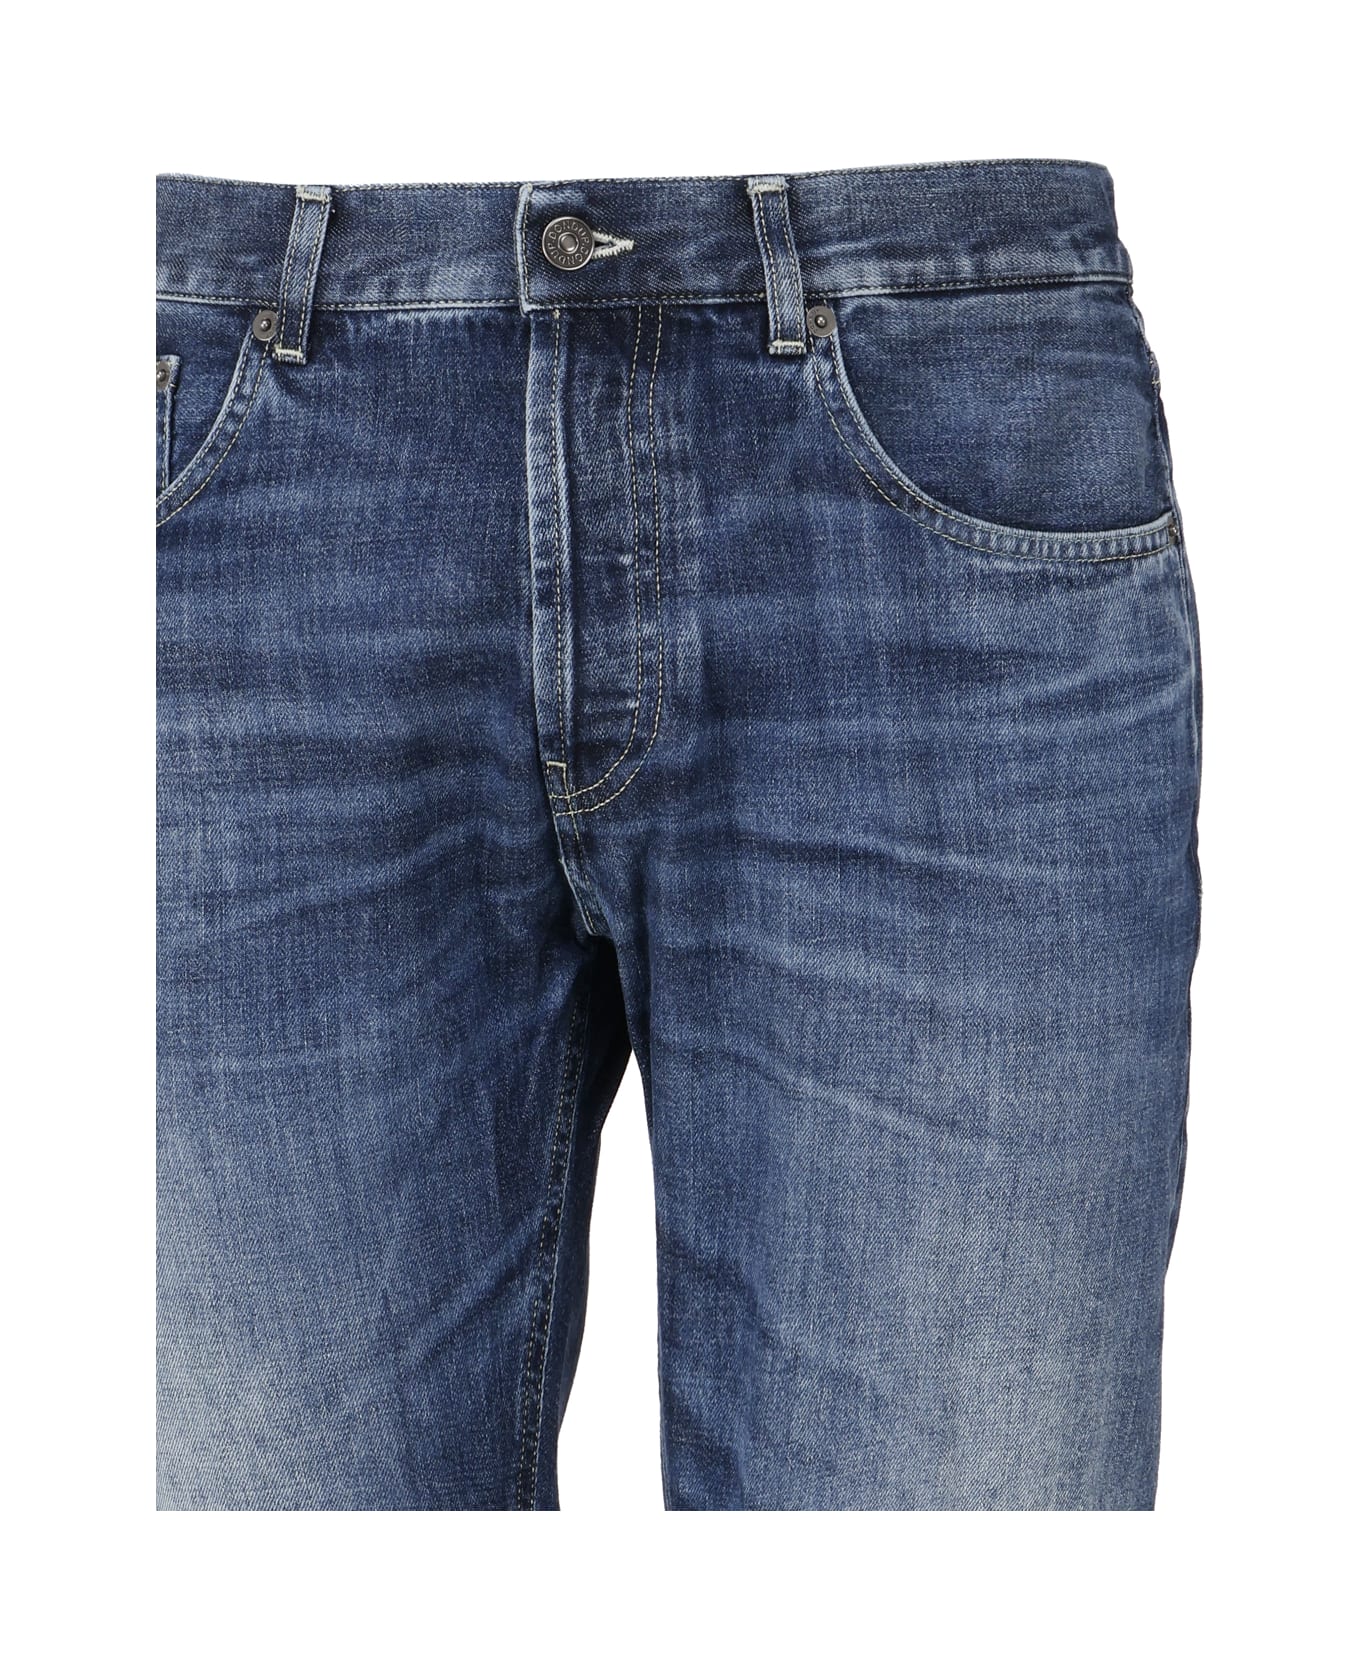 Dondup Jeans 5 Pockets In Cotton - Blue